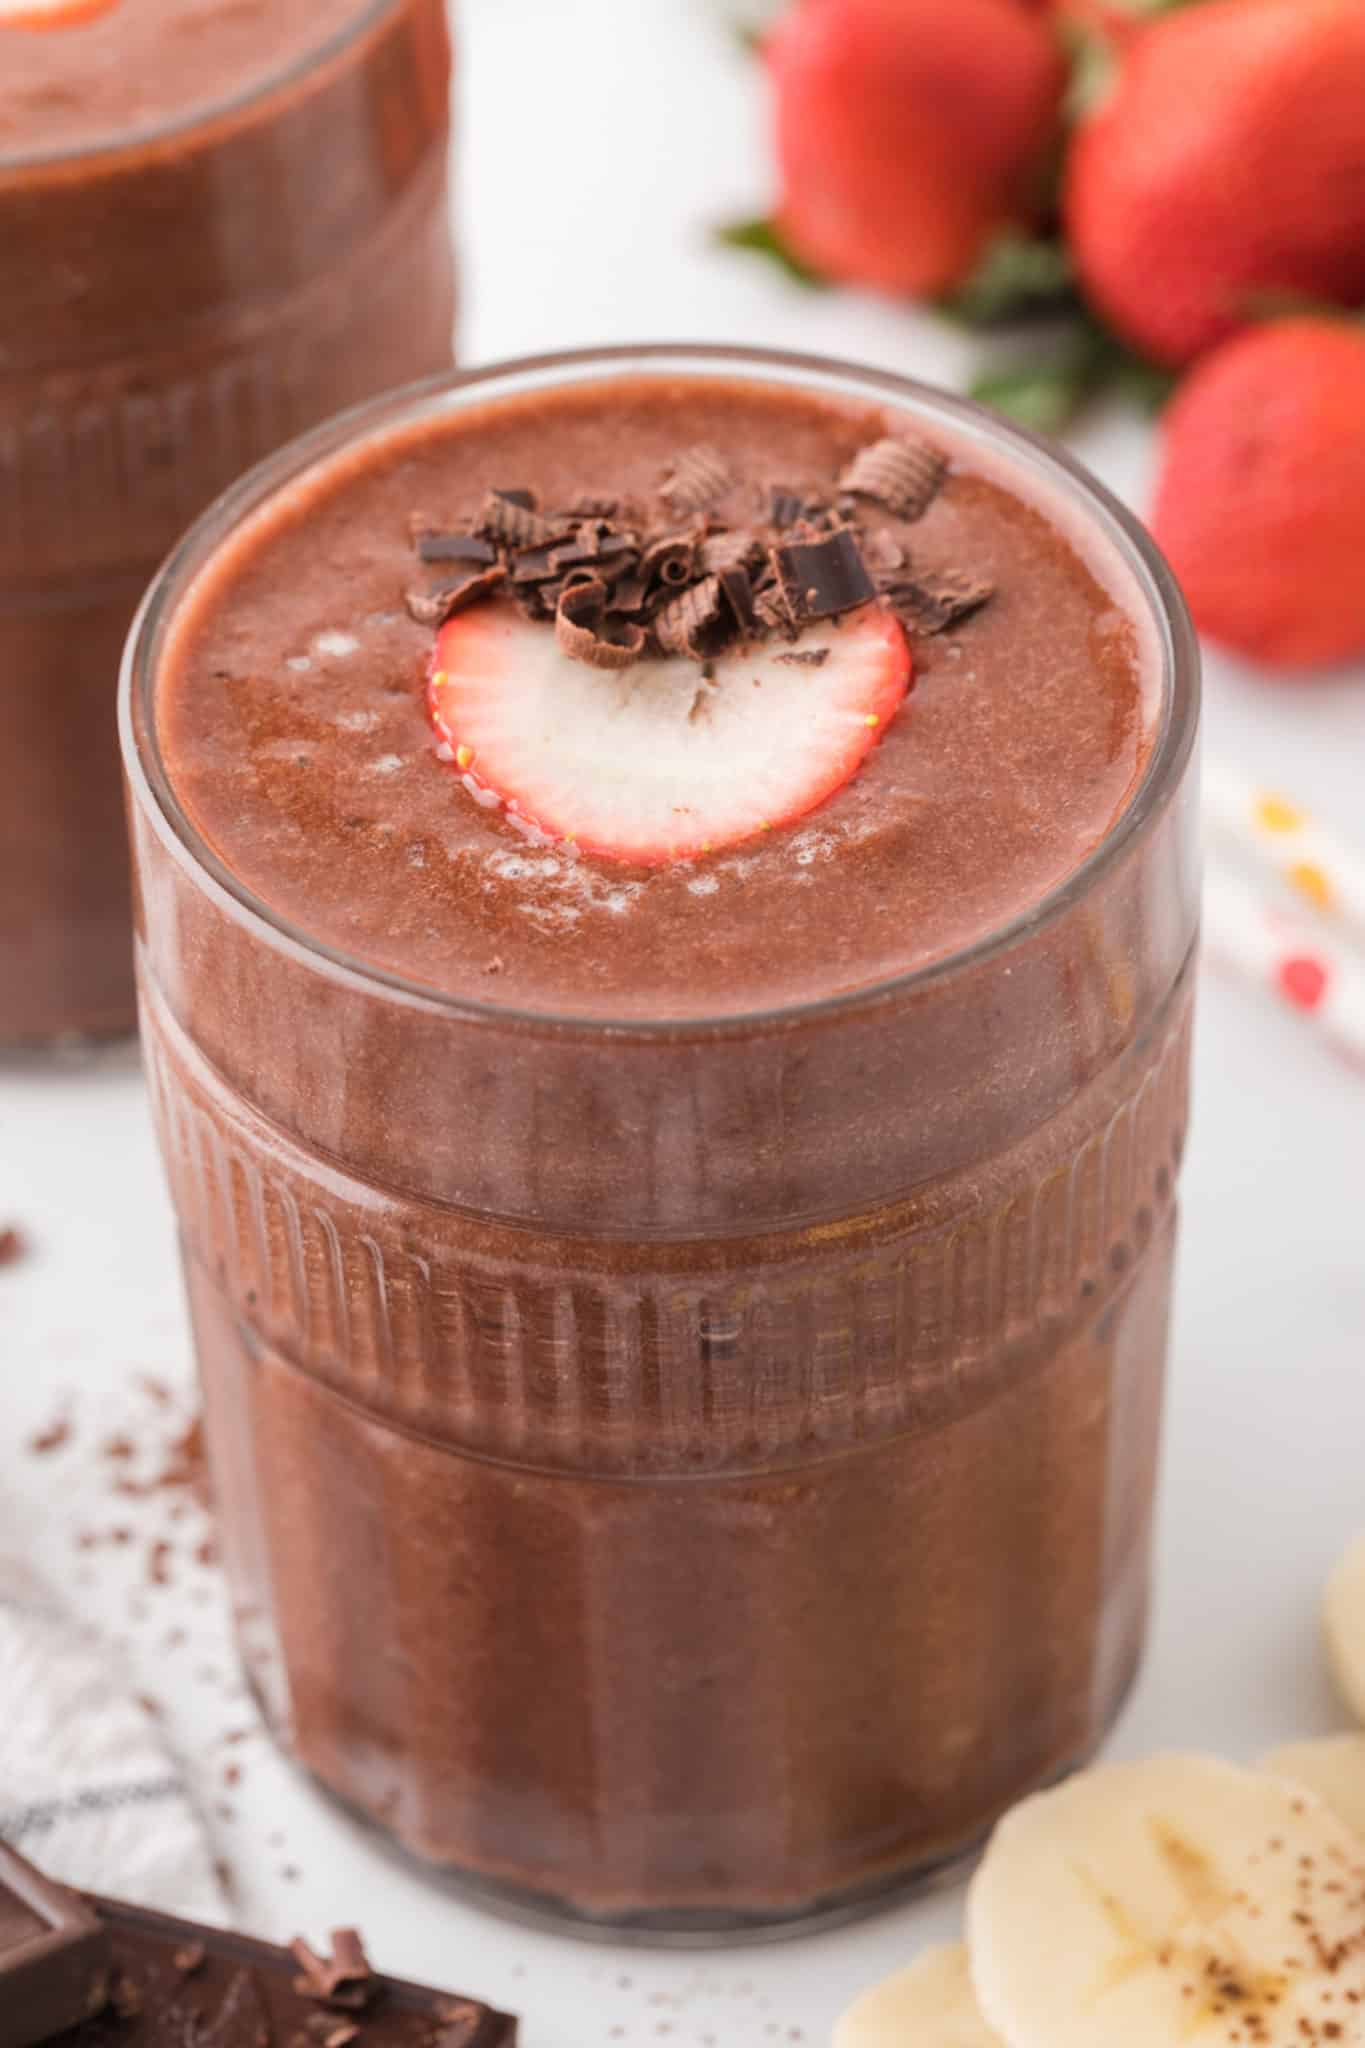 ingredients for chocolate strawberry banana smoothie in a glass with chocolate shavings on top.